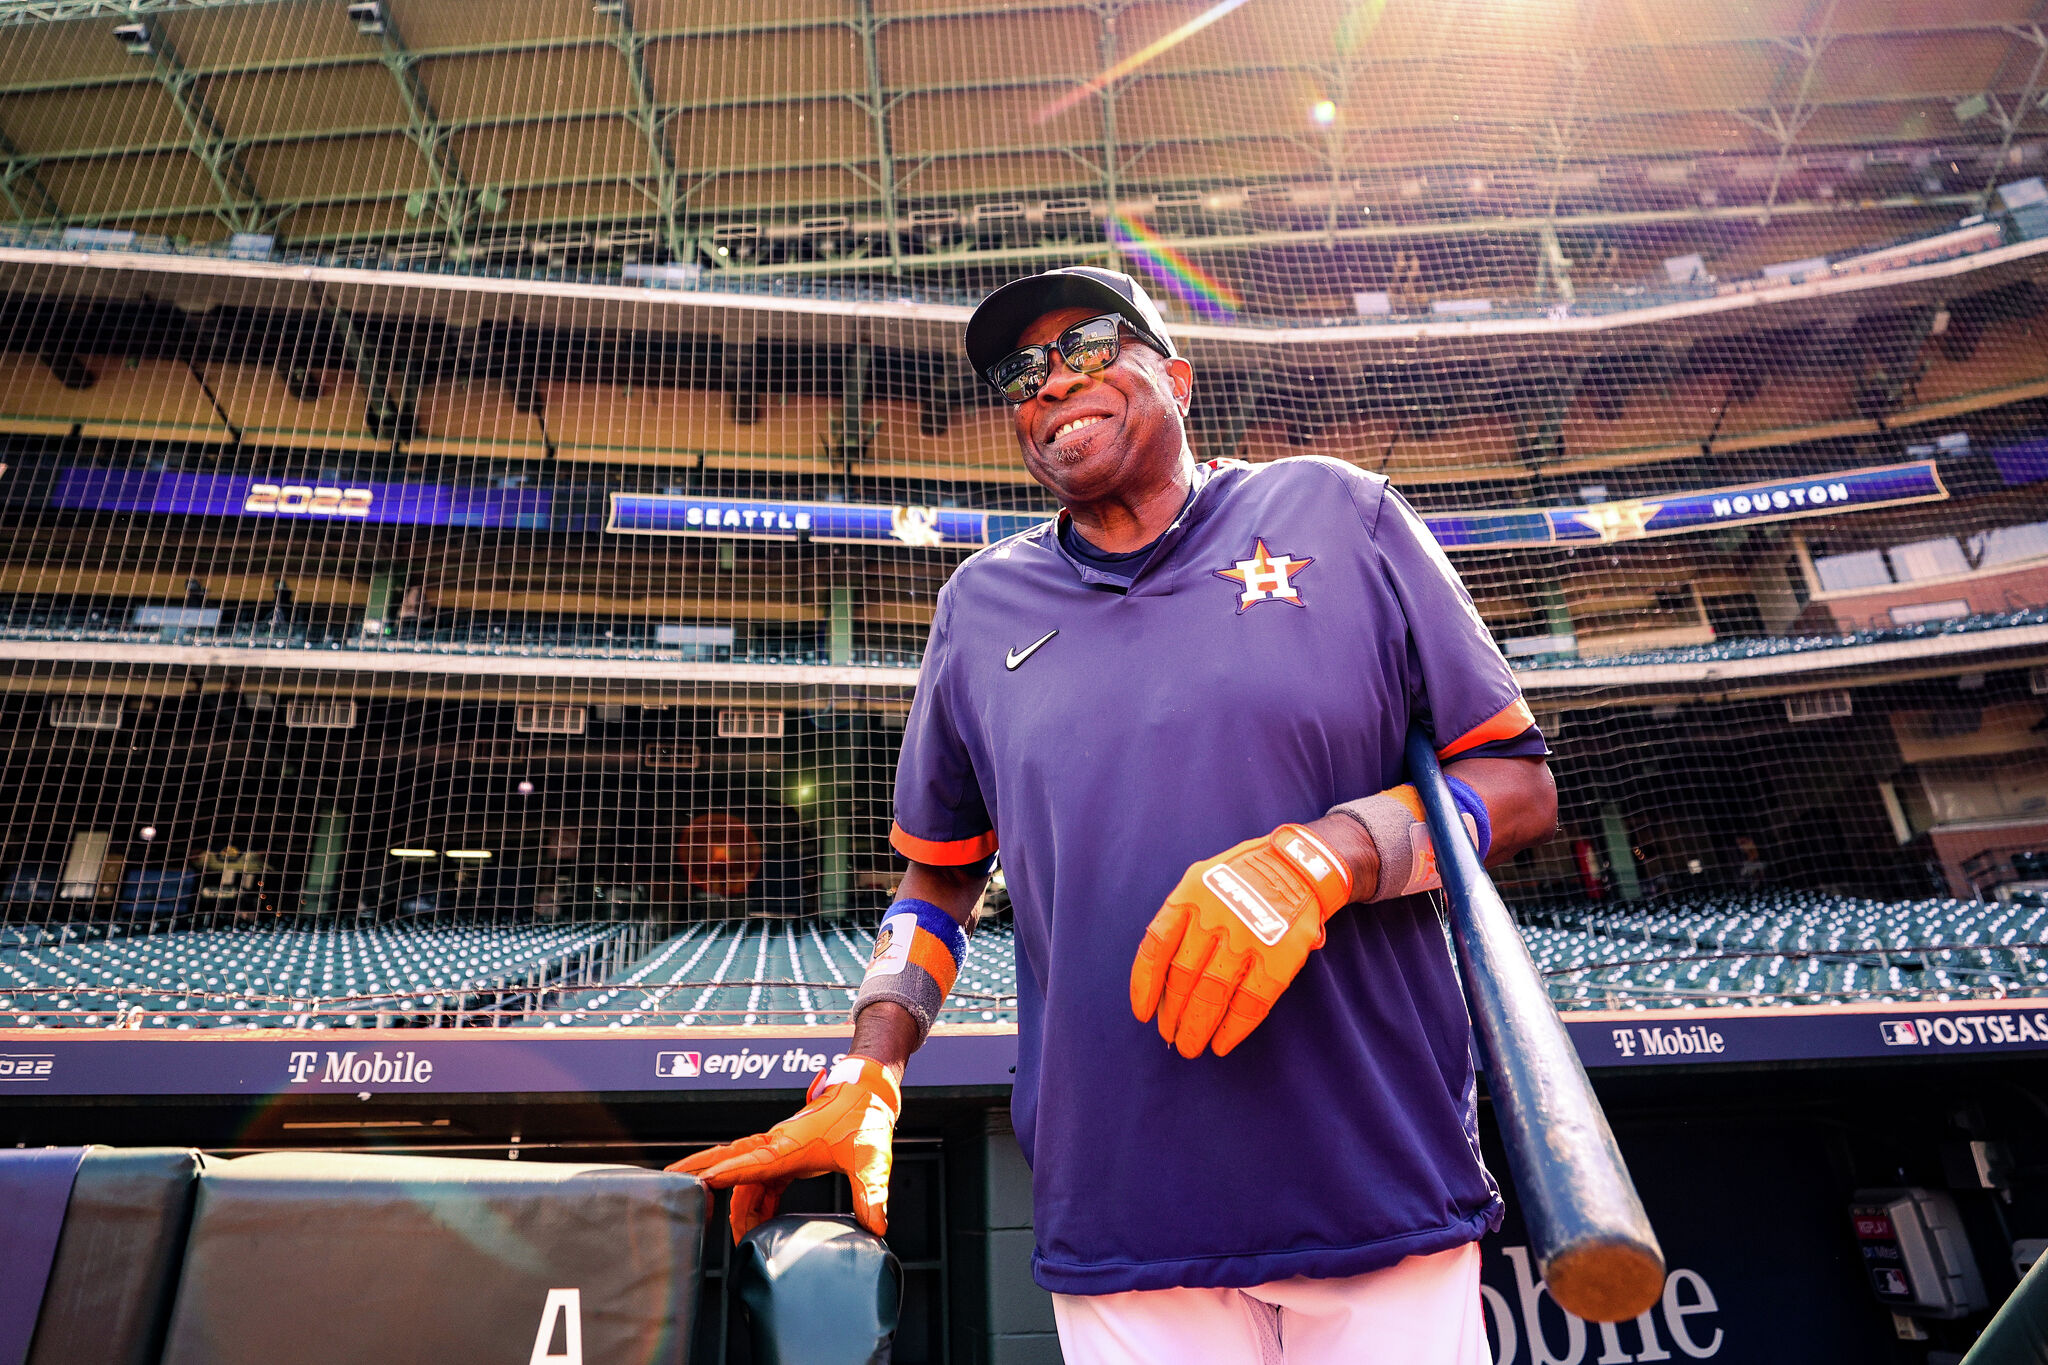 Houston Astros - Another win, another milestone! Dusty Baker is now 12th  all-time in managerial career wins with 1️⃣,9️⃣0️⃣6️⃣ victories. #ForTheH